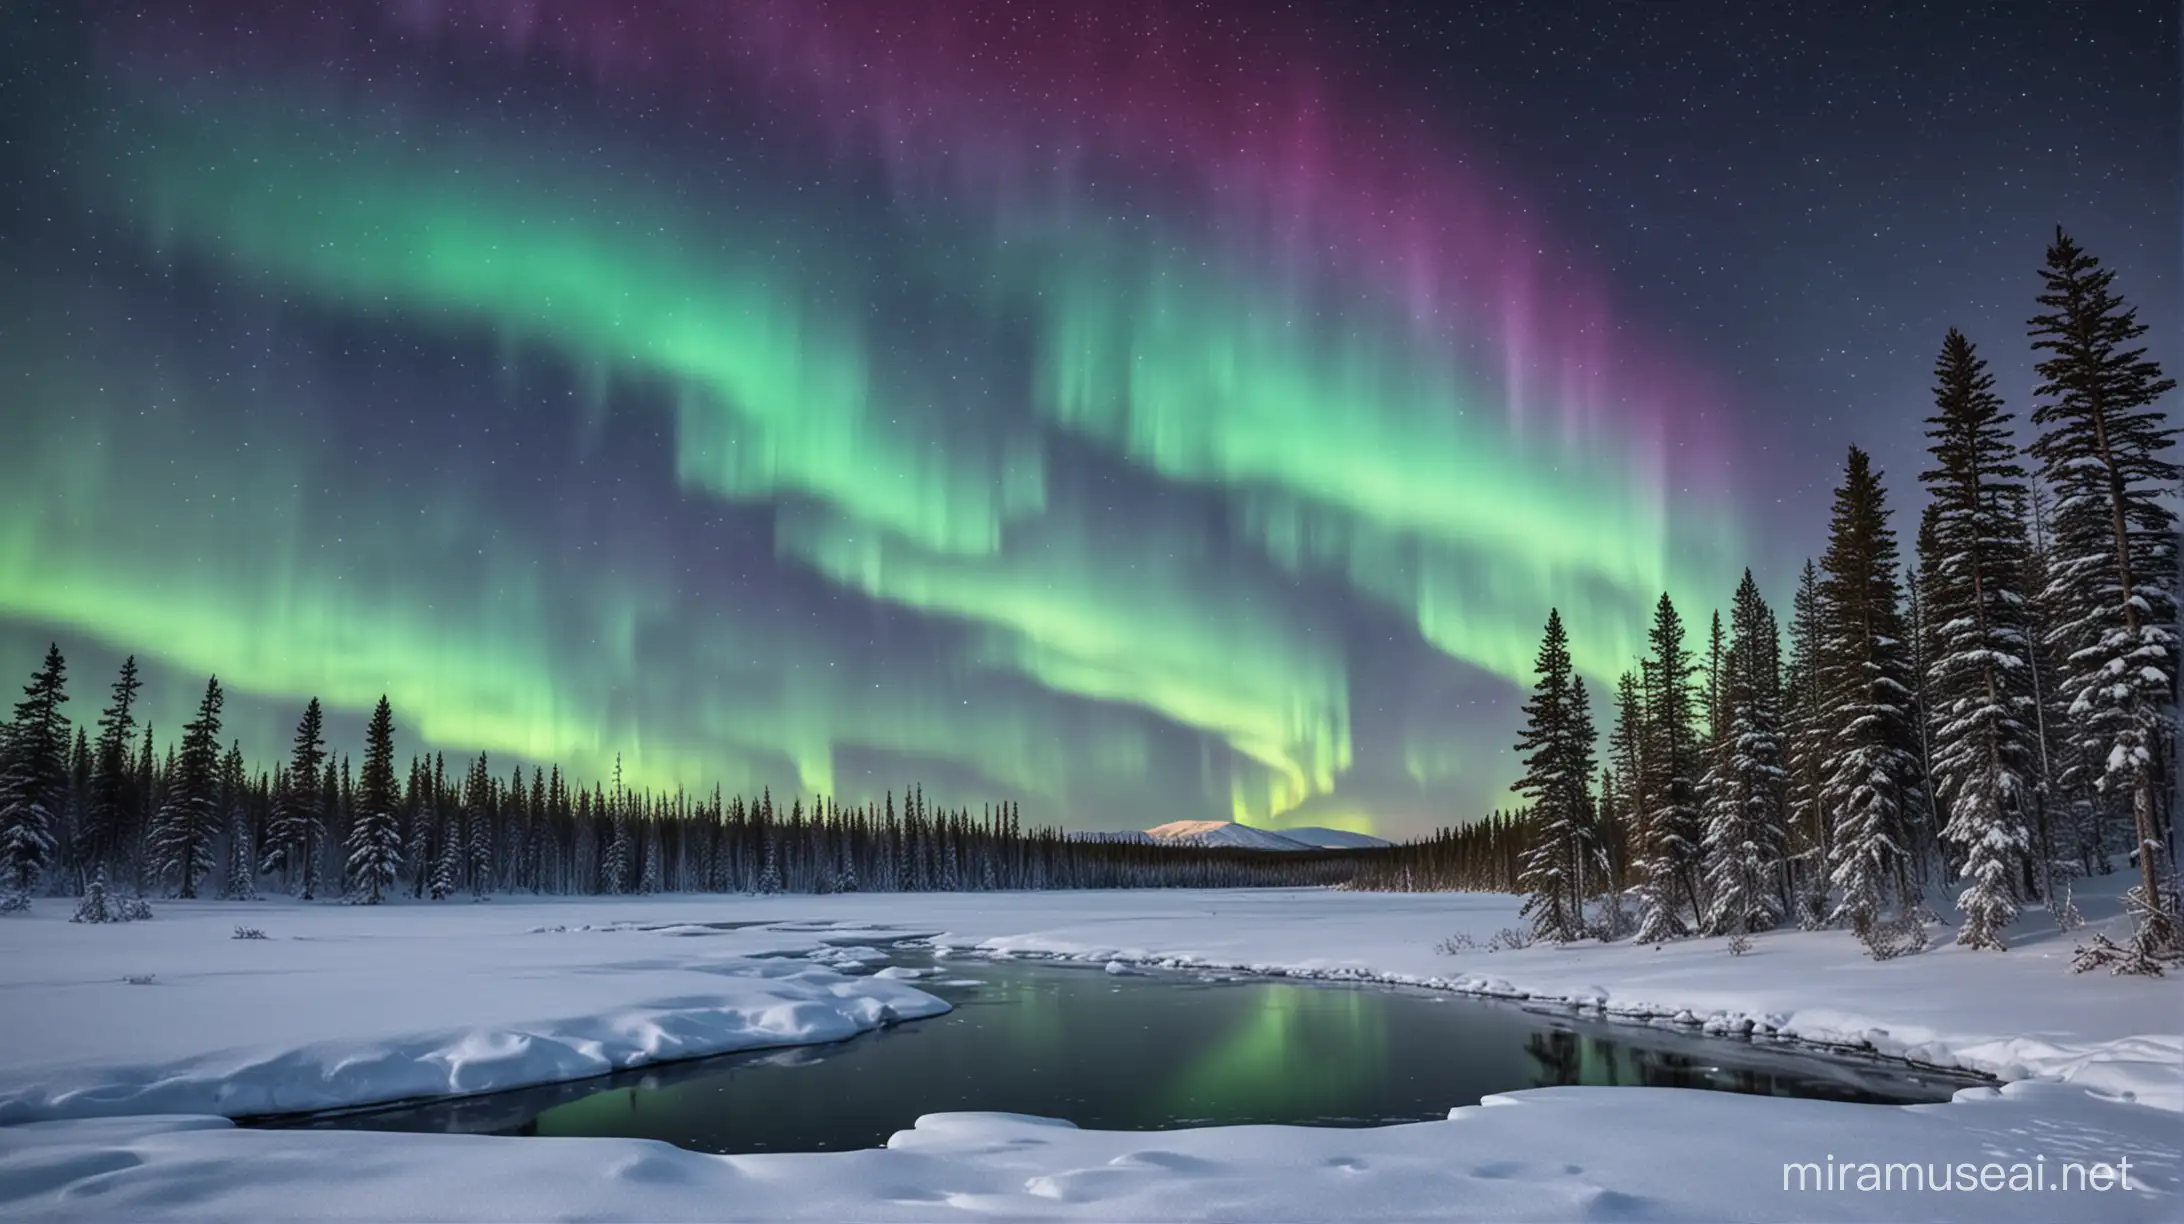 Visualize the Northern Lights dancing across a snow-covered landscape. This scene may include a frozen lake, pine trees weighed down by snow, and the vibrant colors of the northern lights in the night sky.